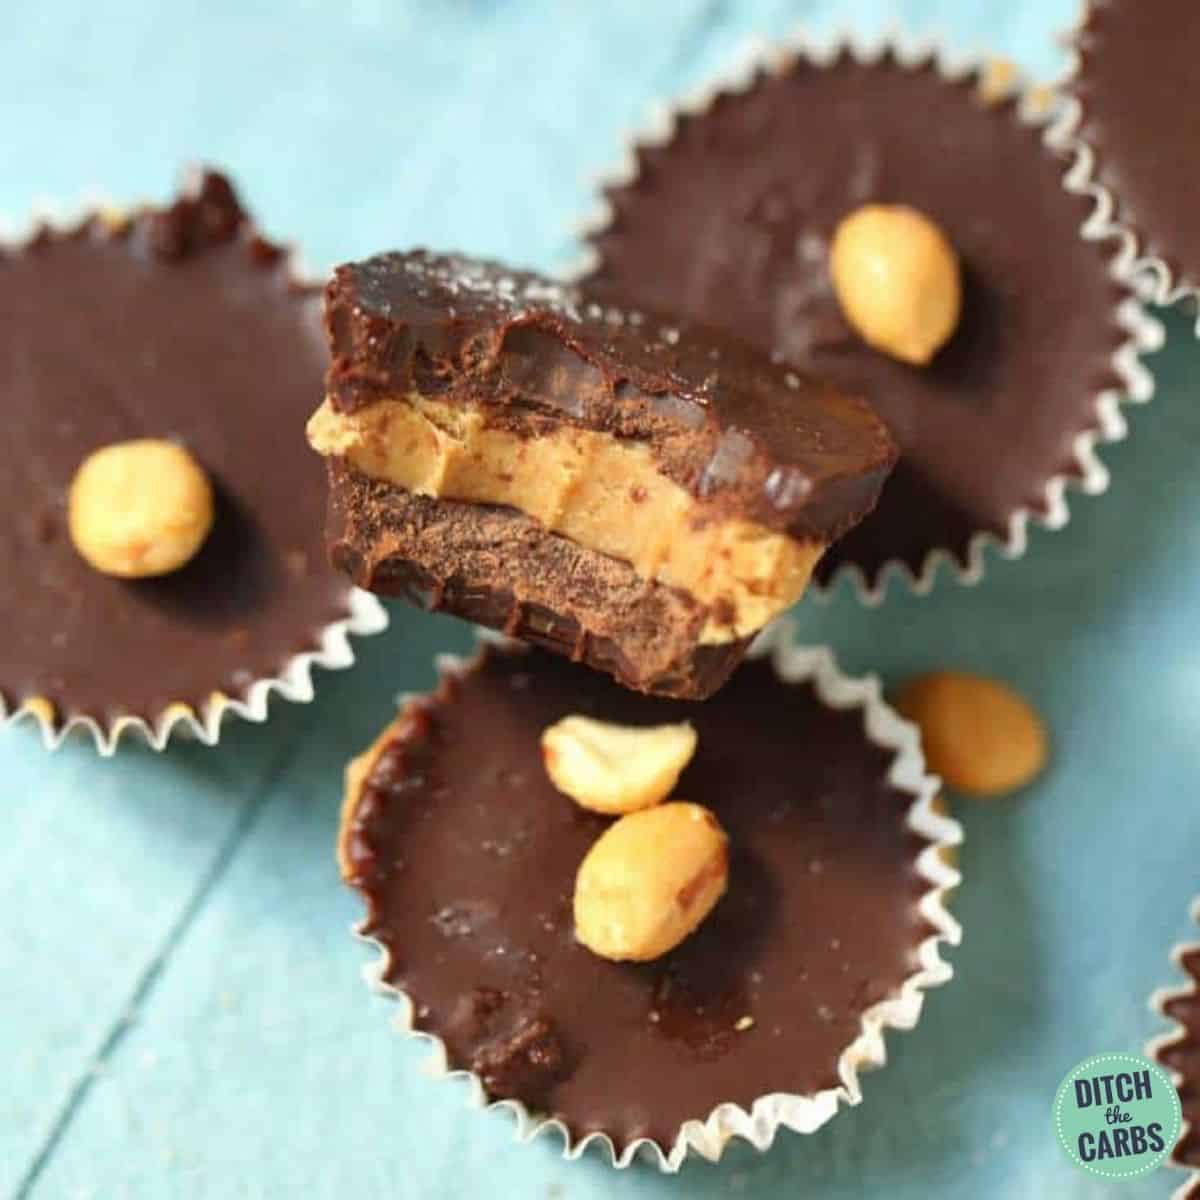 Sugar free and low carb peanut butter cups on a blue cloth with peanuts and salt